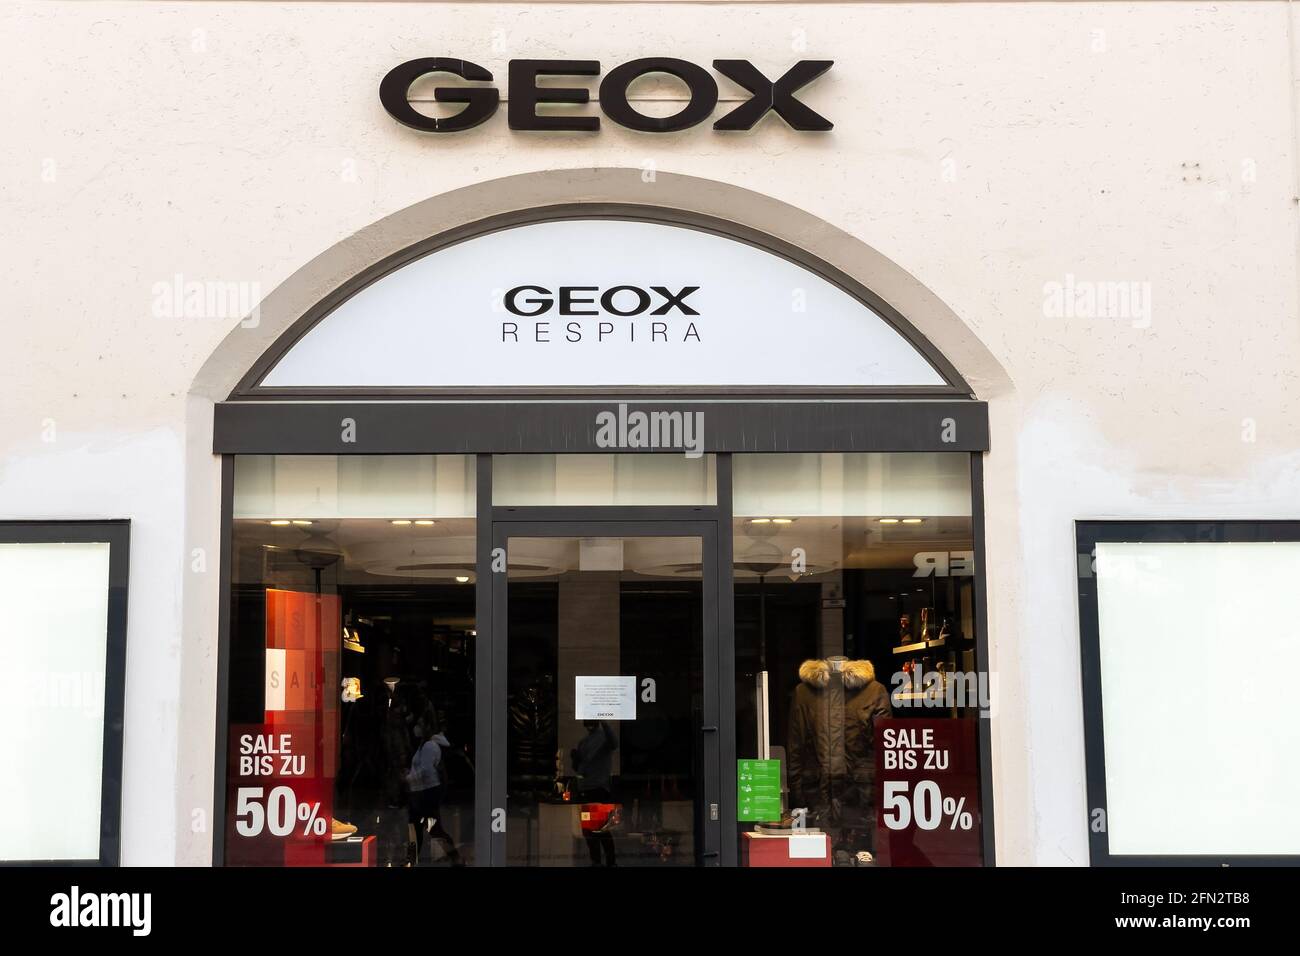 Geox High Resolution Stock Photography and Images - Alamy